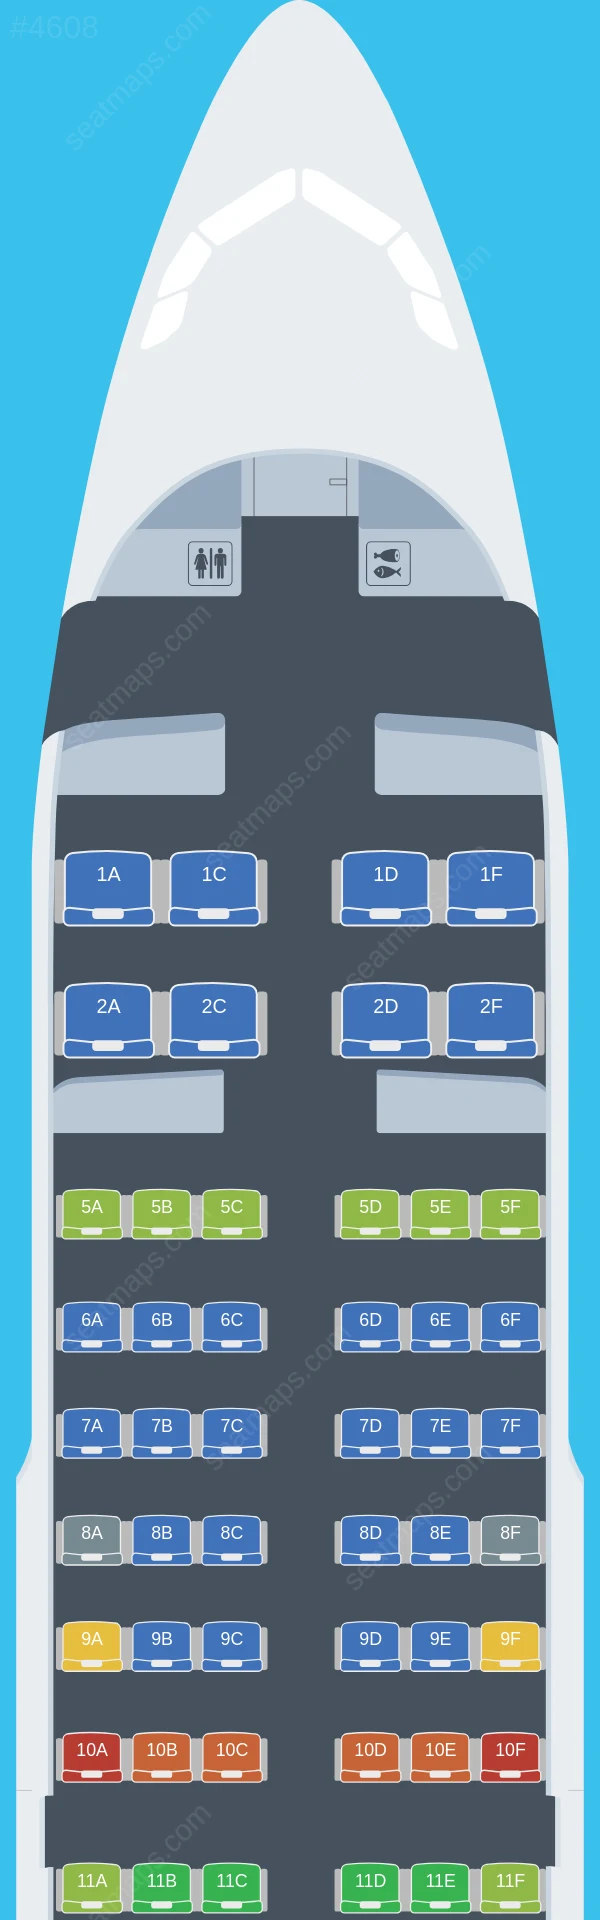 Tibet Airlines Airbus A319-100 seatmap preview